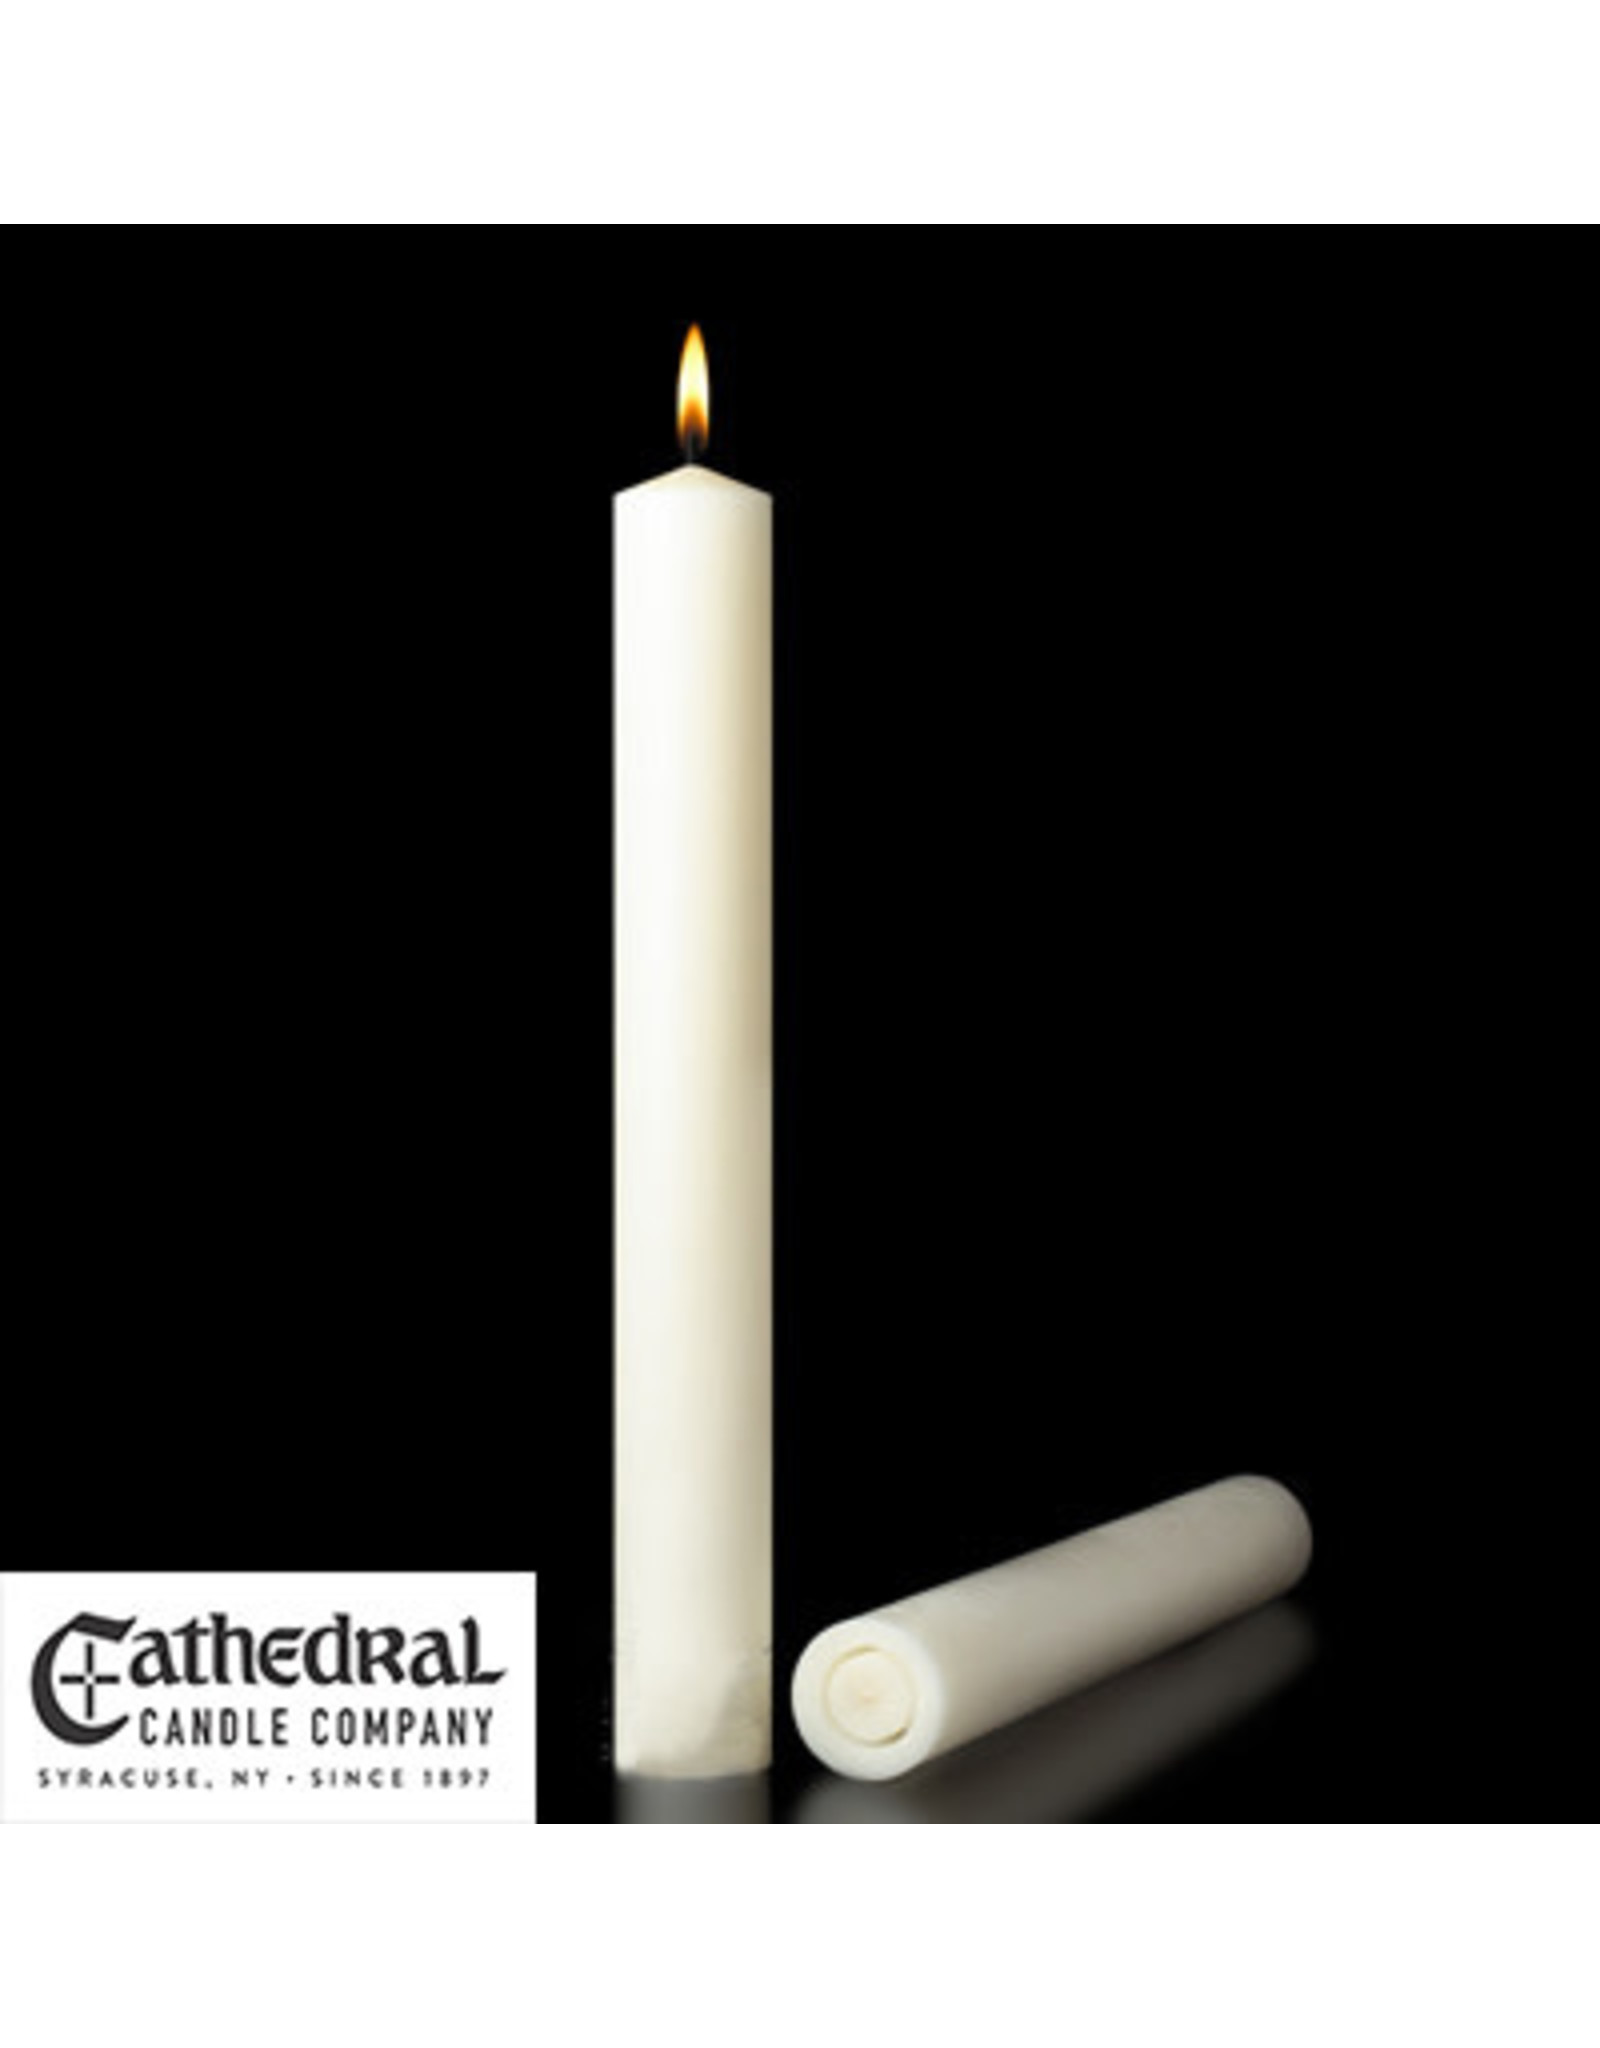 Cathedral Candle 51% Beeswax Altar Candles 1-15/16"x12" APE (12)